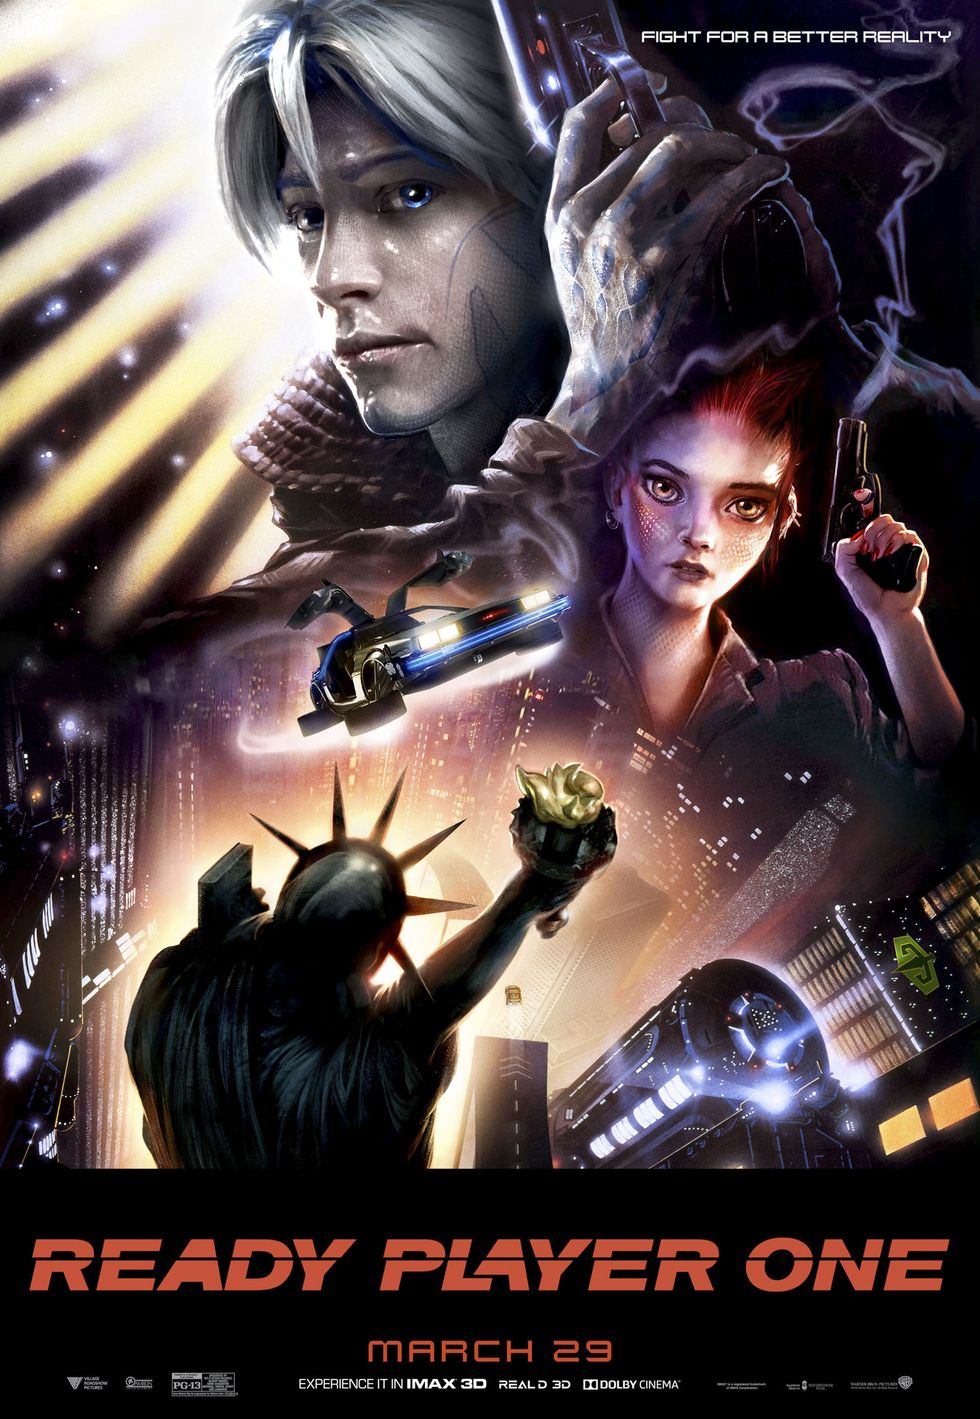 Ready Player One Posters - The Iconic Movie-Inspired Ready Player